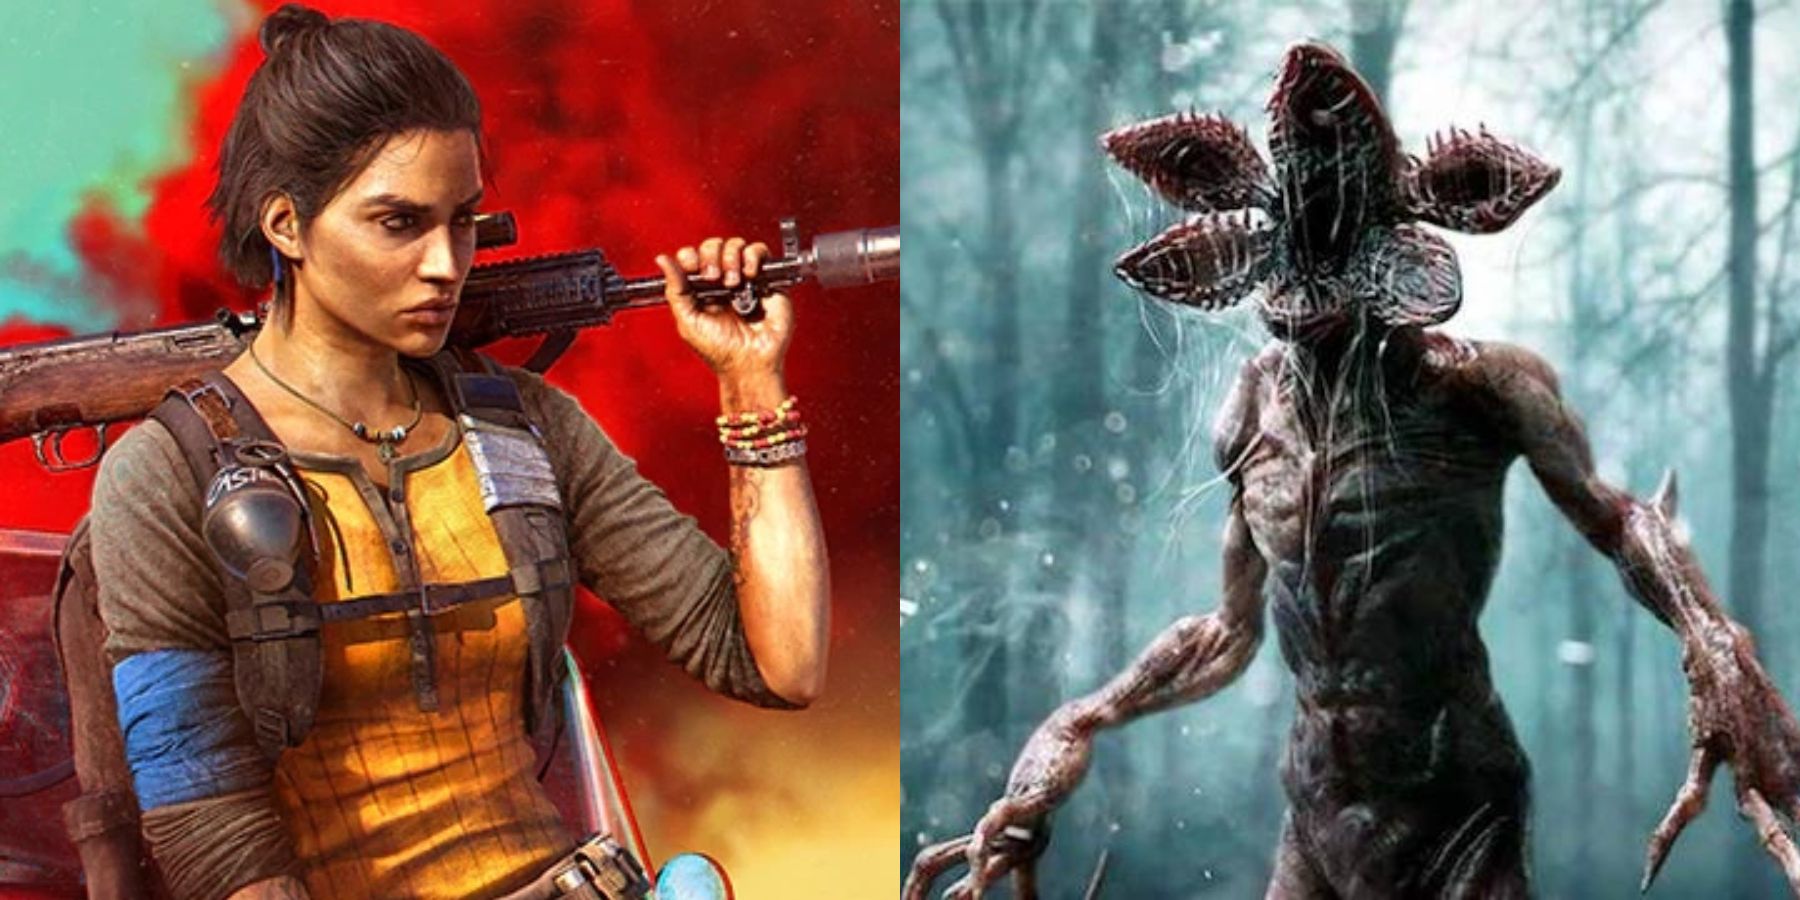 Far Cry 6 Stranger Things Crossover Coming This Week